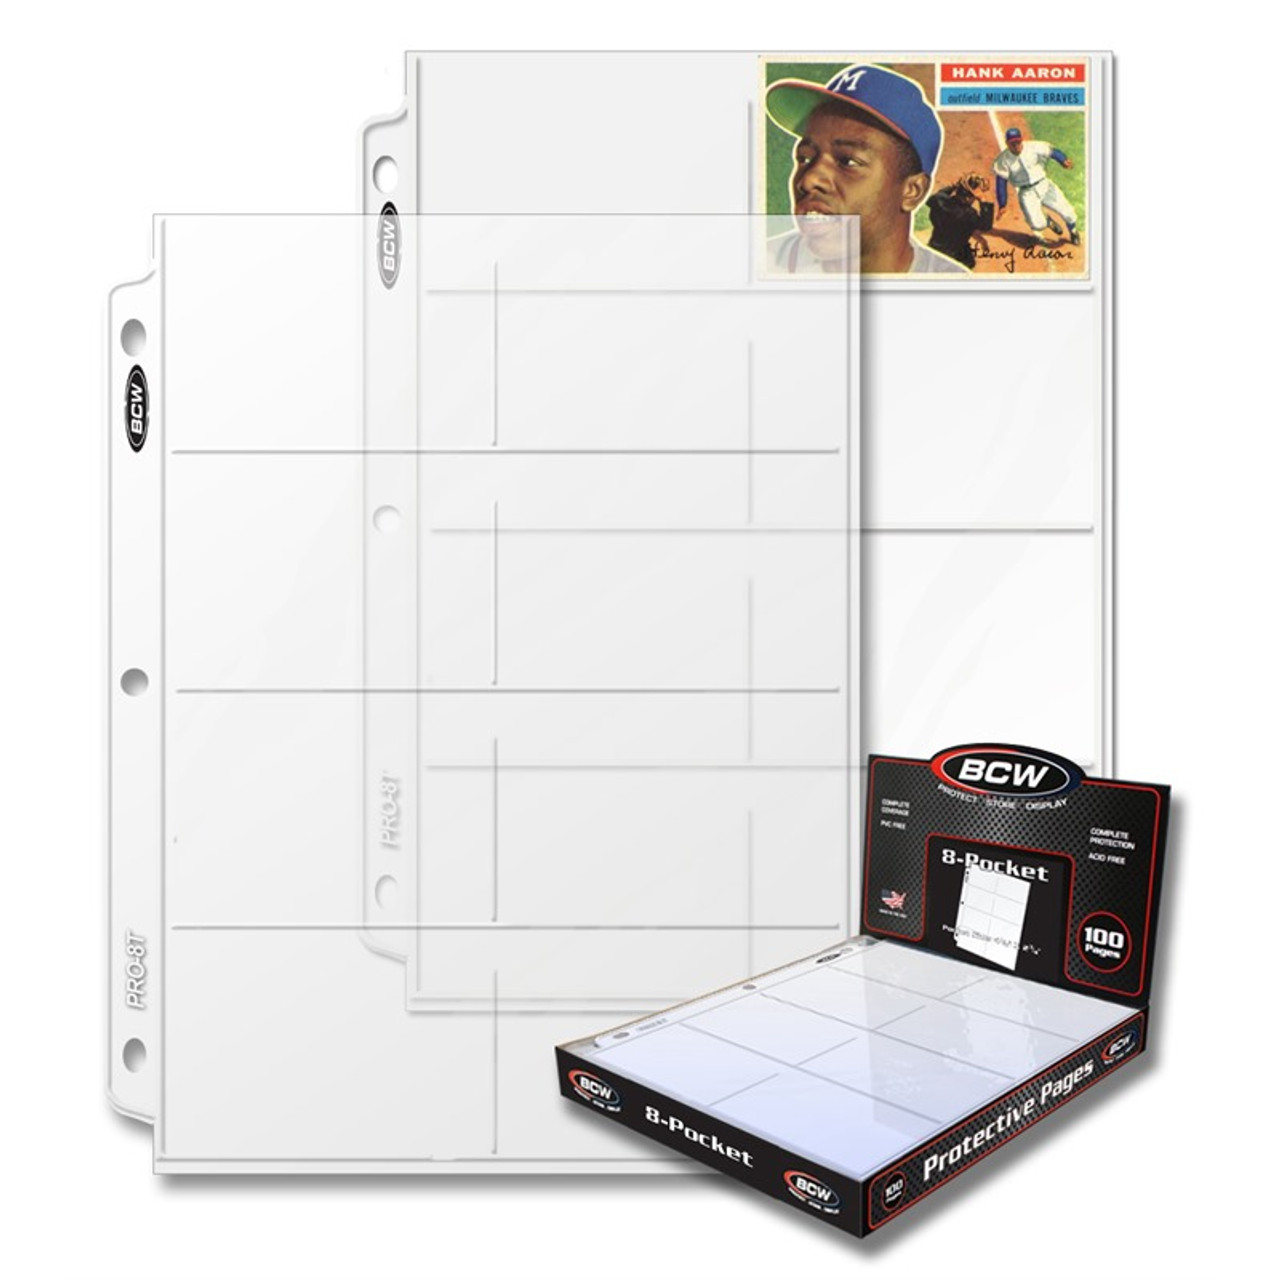 BCW Pro 8-Pocket Pages 100ct Box